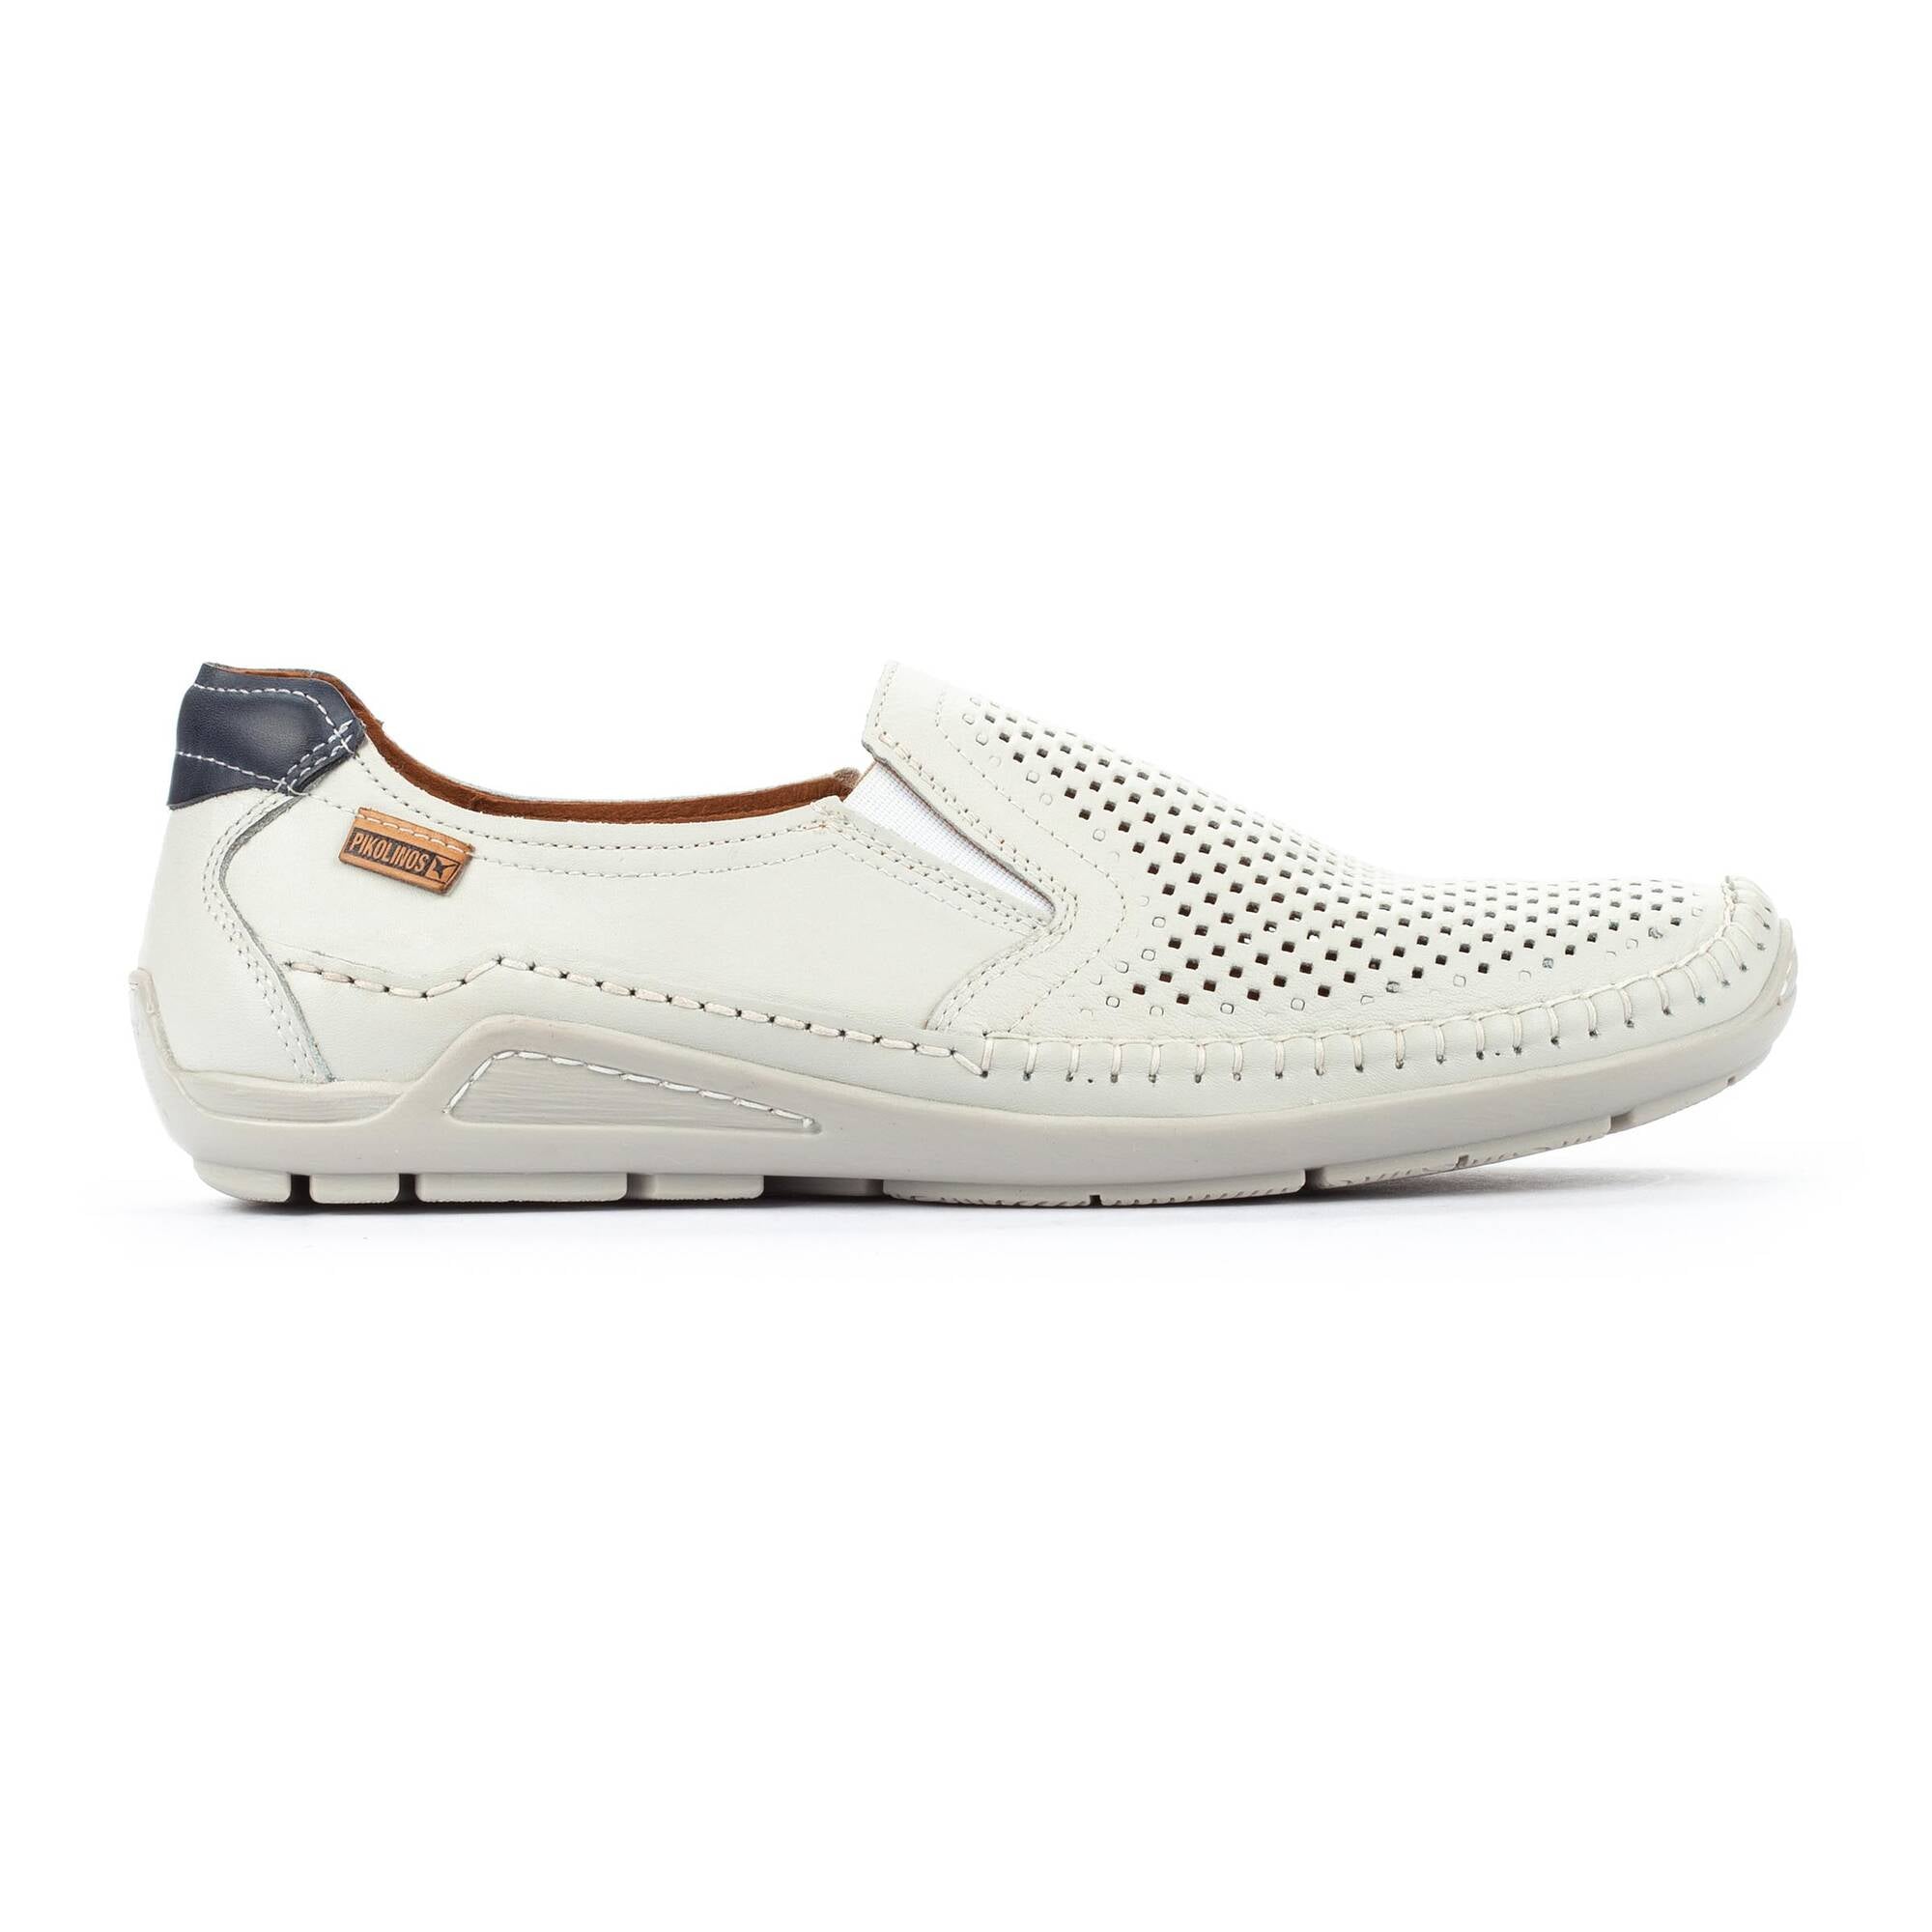 'Azores' men's loafer - Off white - Chaplinshoes'Azores' men's loafer - Off whitePikolinos